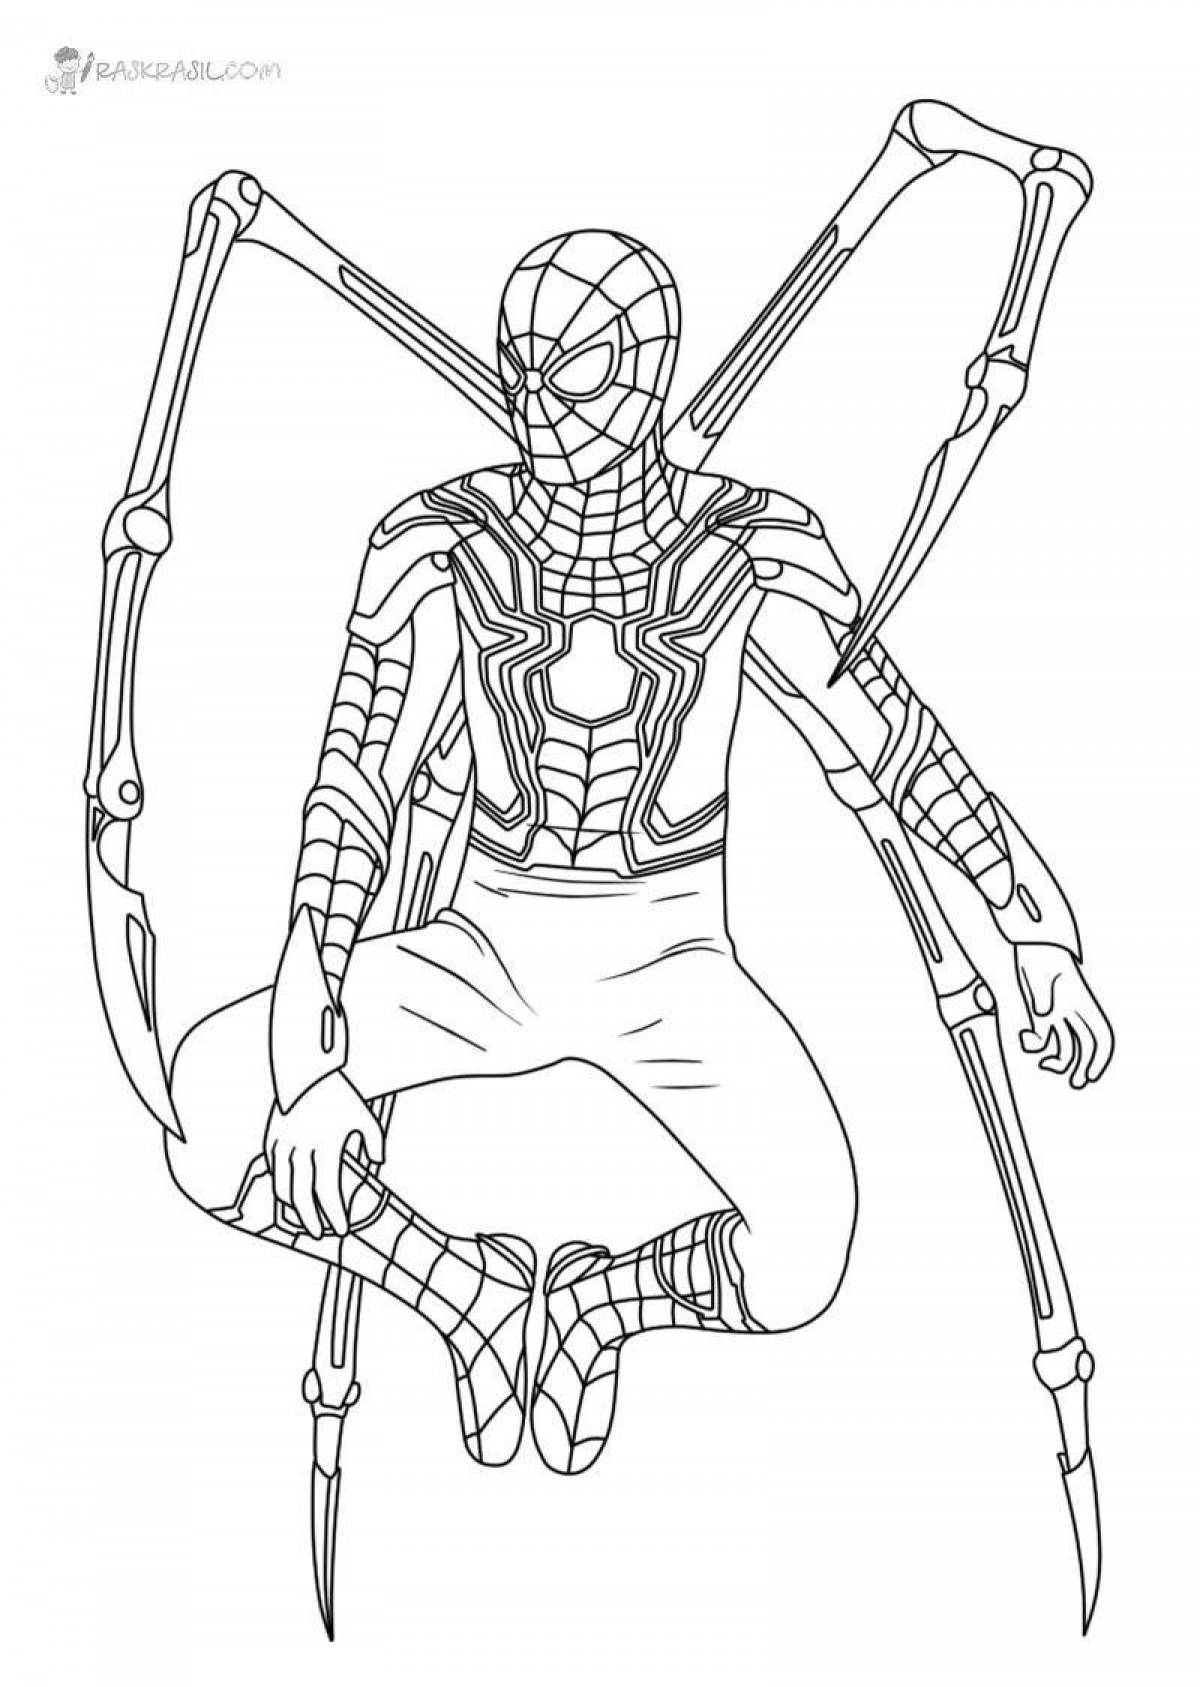 Perfect spiderman coloring page